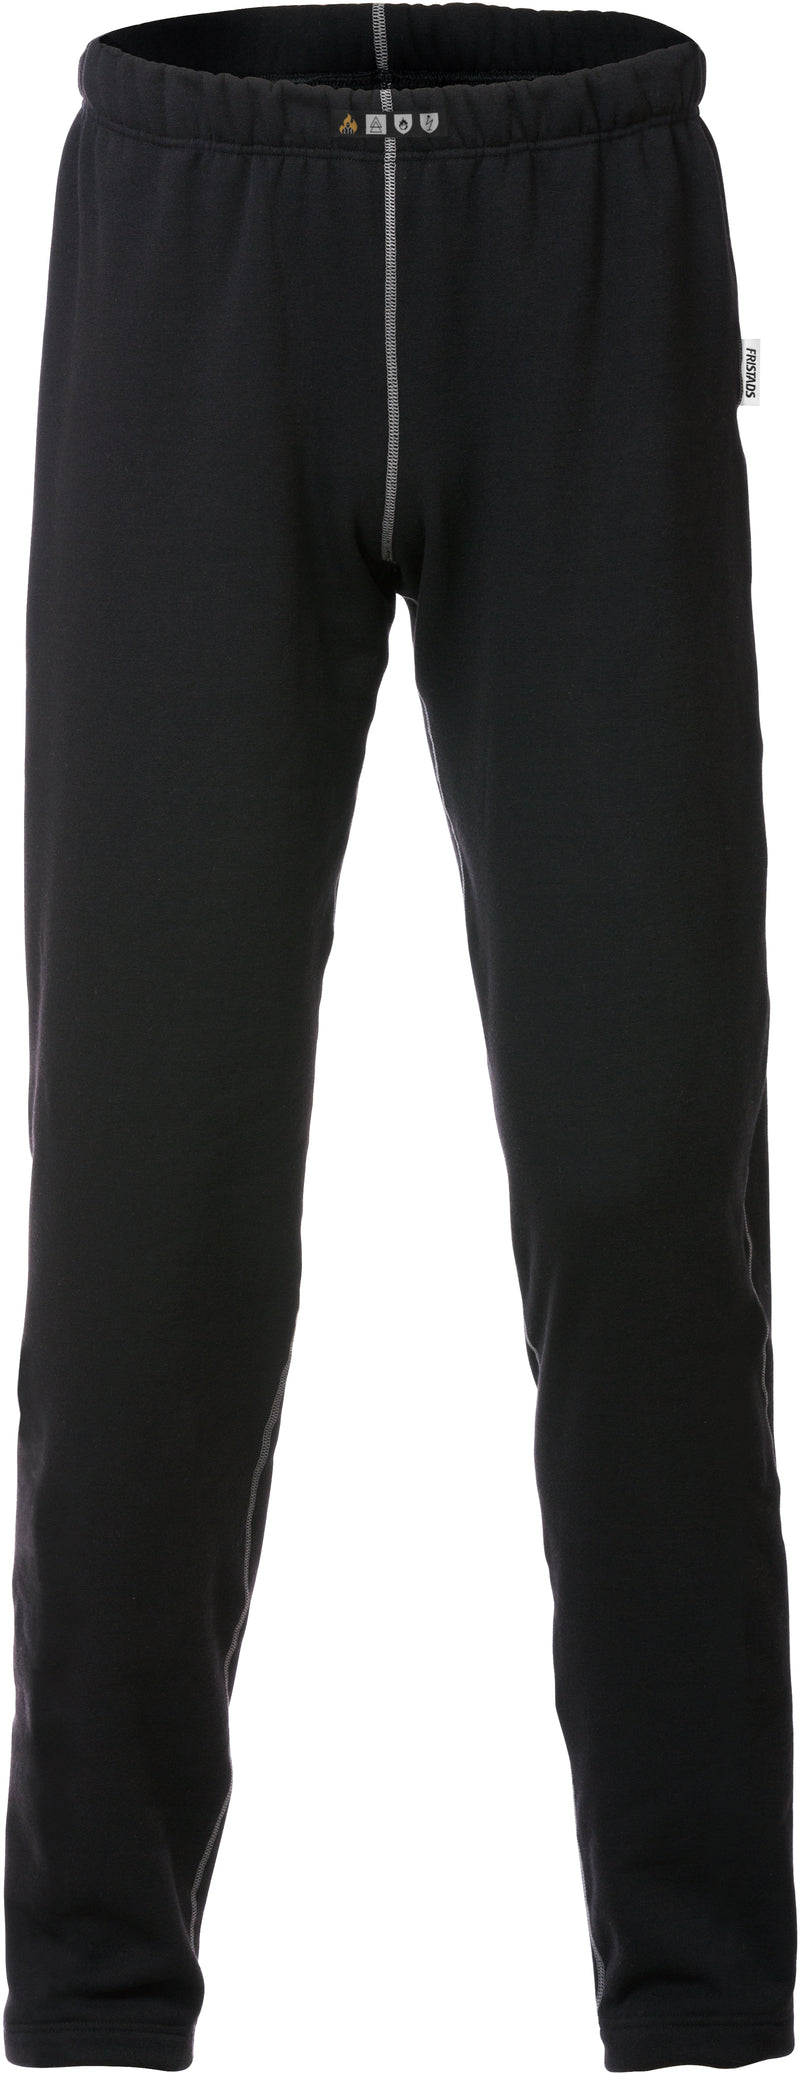 Load image into Gallery viewer, Thermal underpants FRISTADS FLAMESTAT FLEECE LONG JOHNS 7045 MFR
